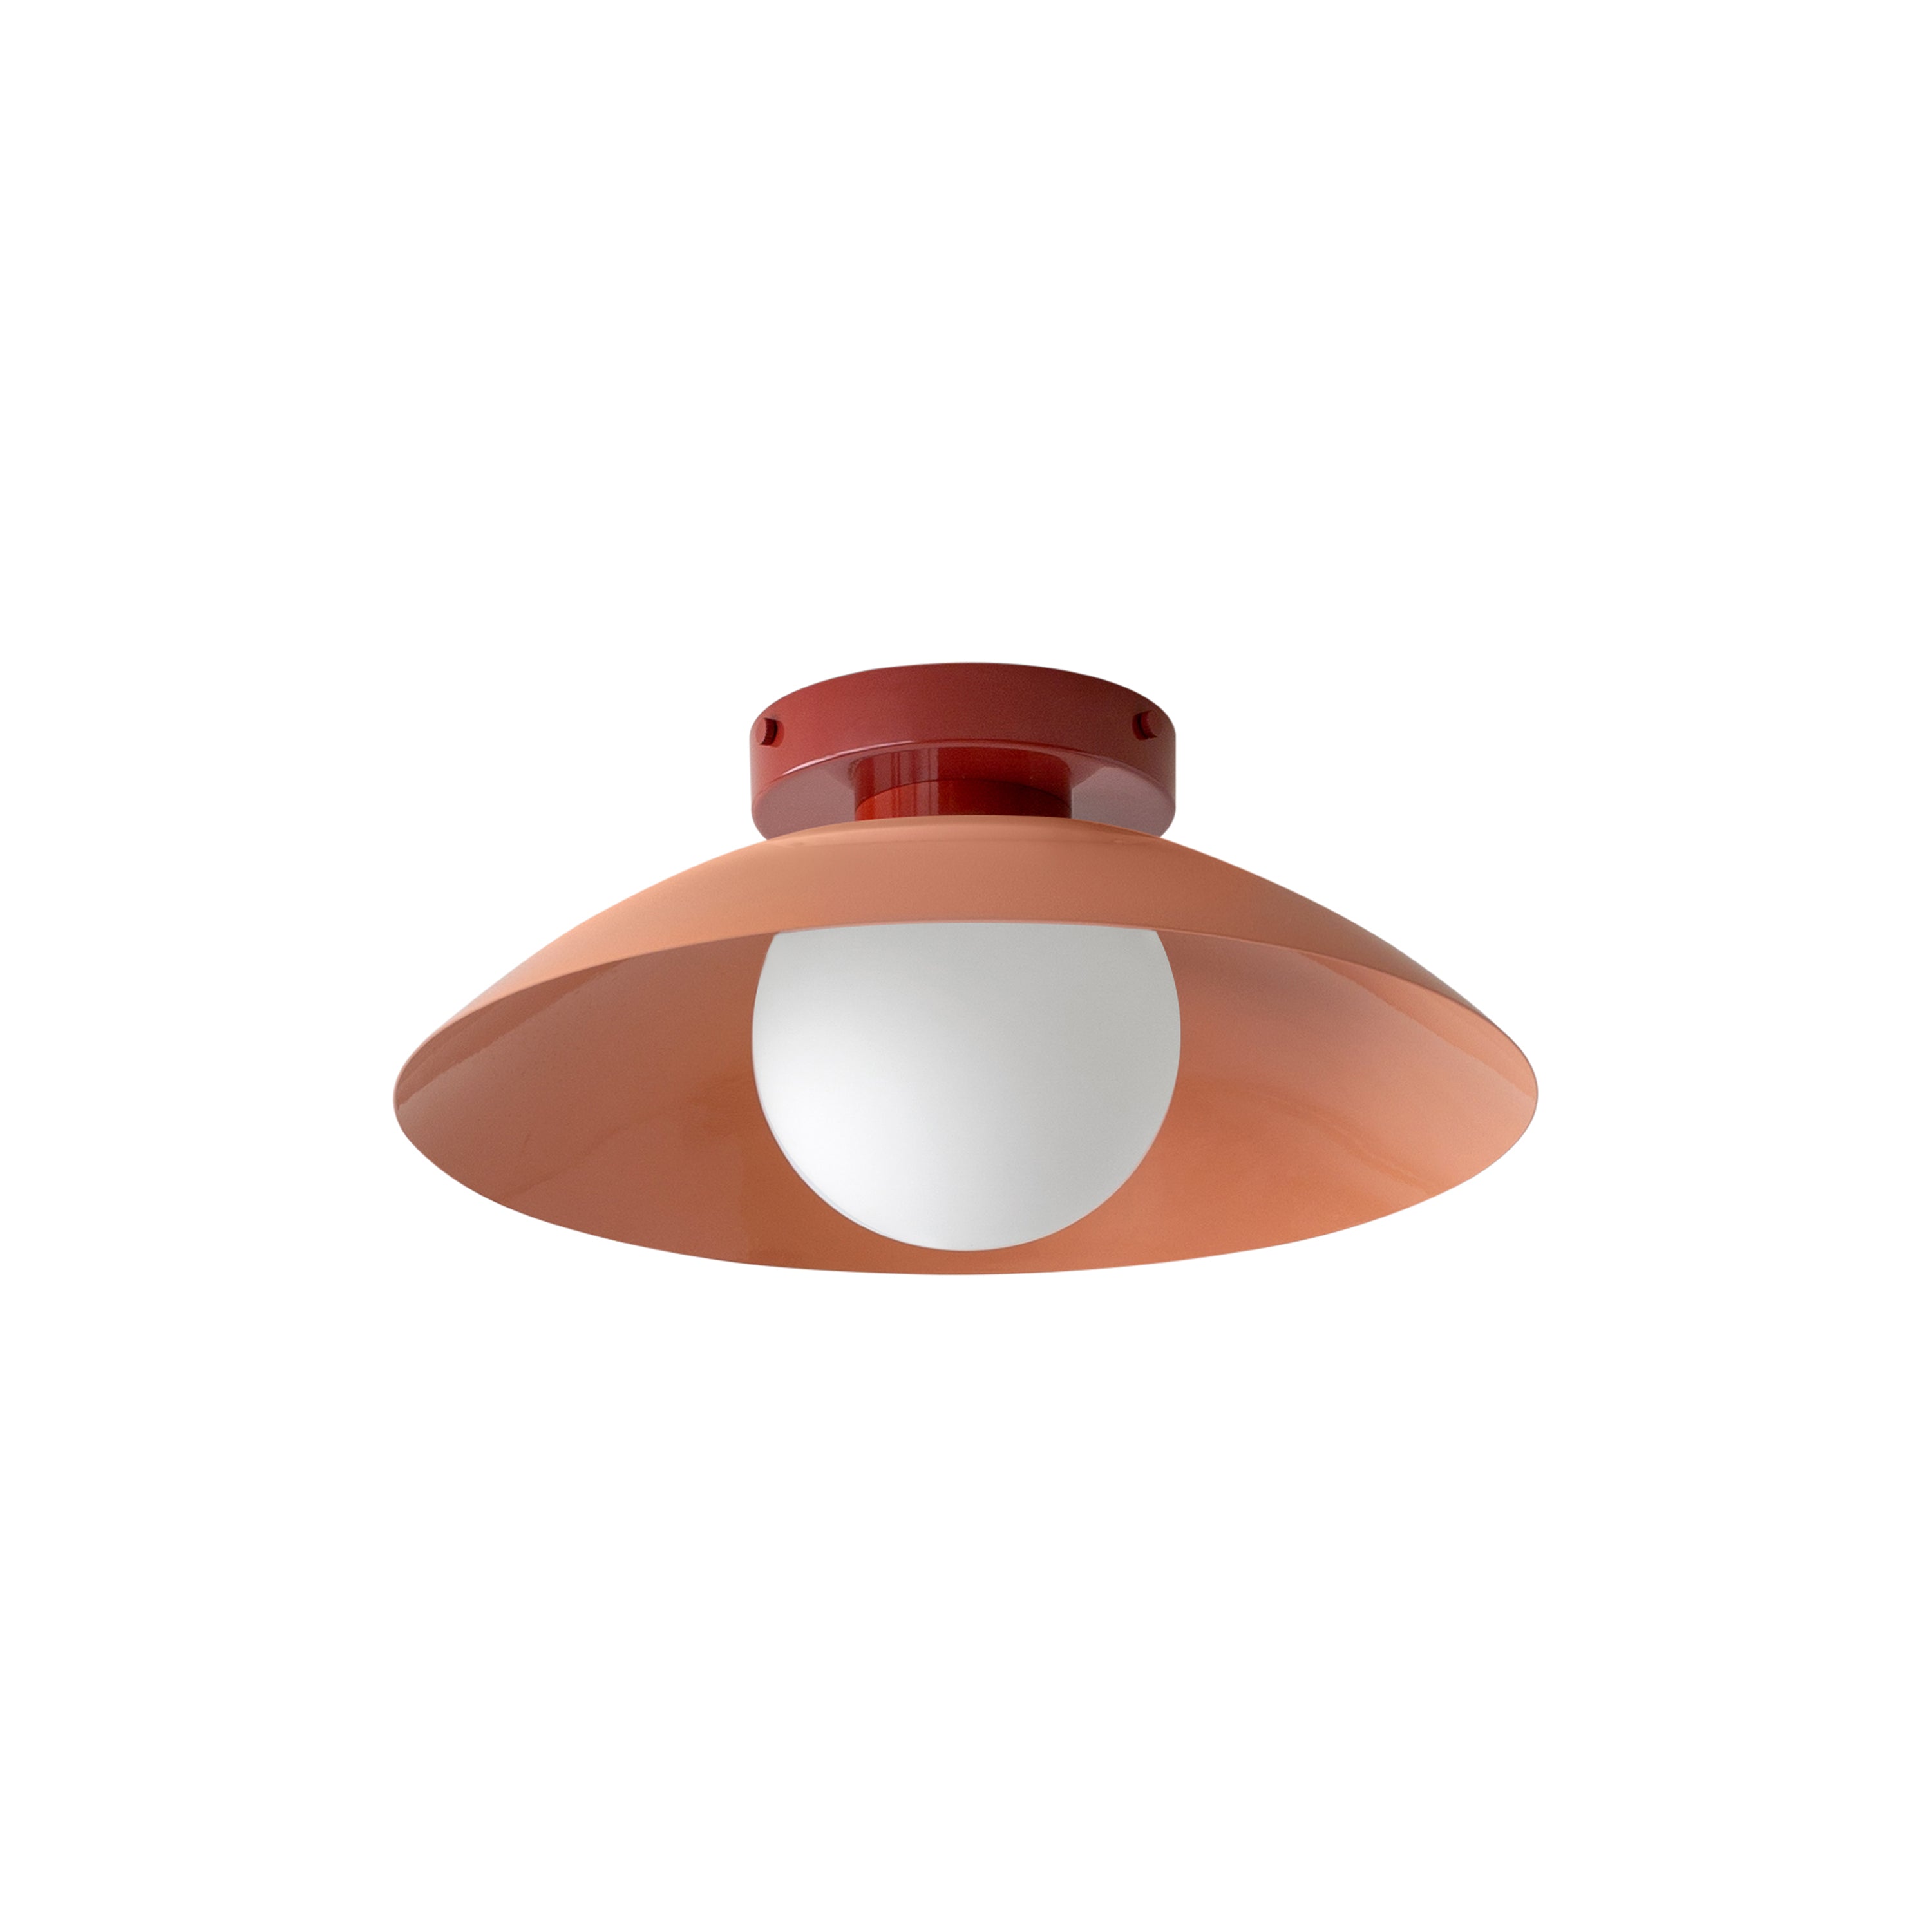 Arundel Orb Surface Mount: Peach + Oxide Red + Hardwire